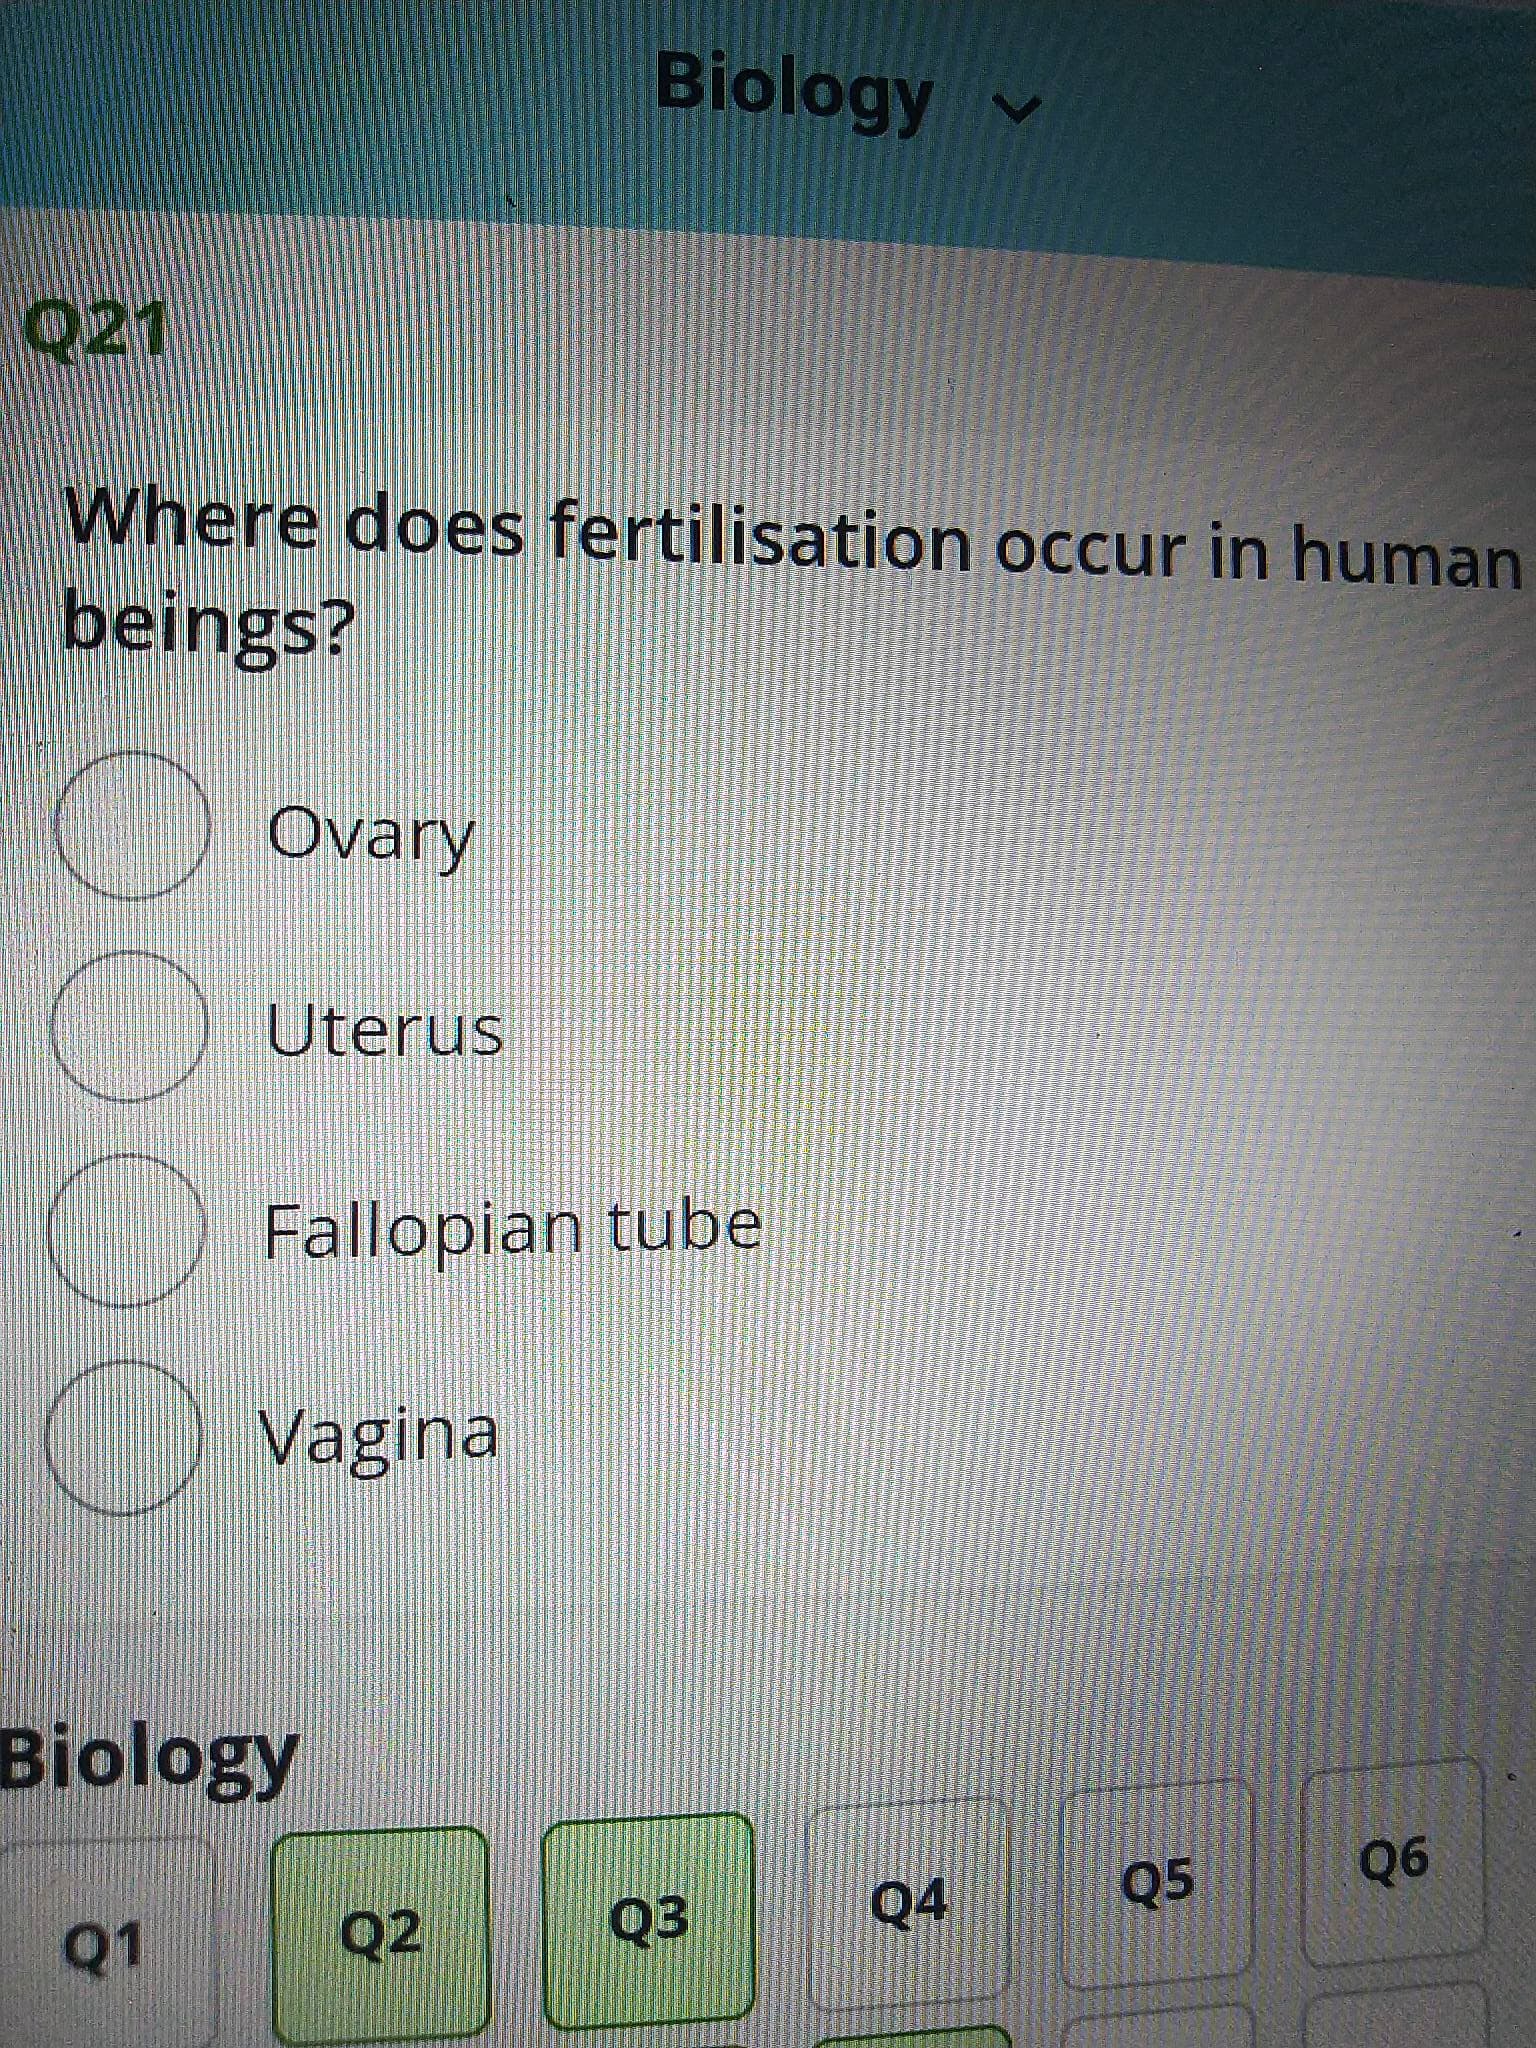 Biology
Where does fertilisation occur in human
beings?
Ovary
Uterus
Fallopian tube
Vaginal
Biology
Q4
Q5
90
Q2
